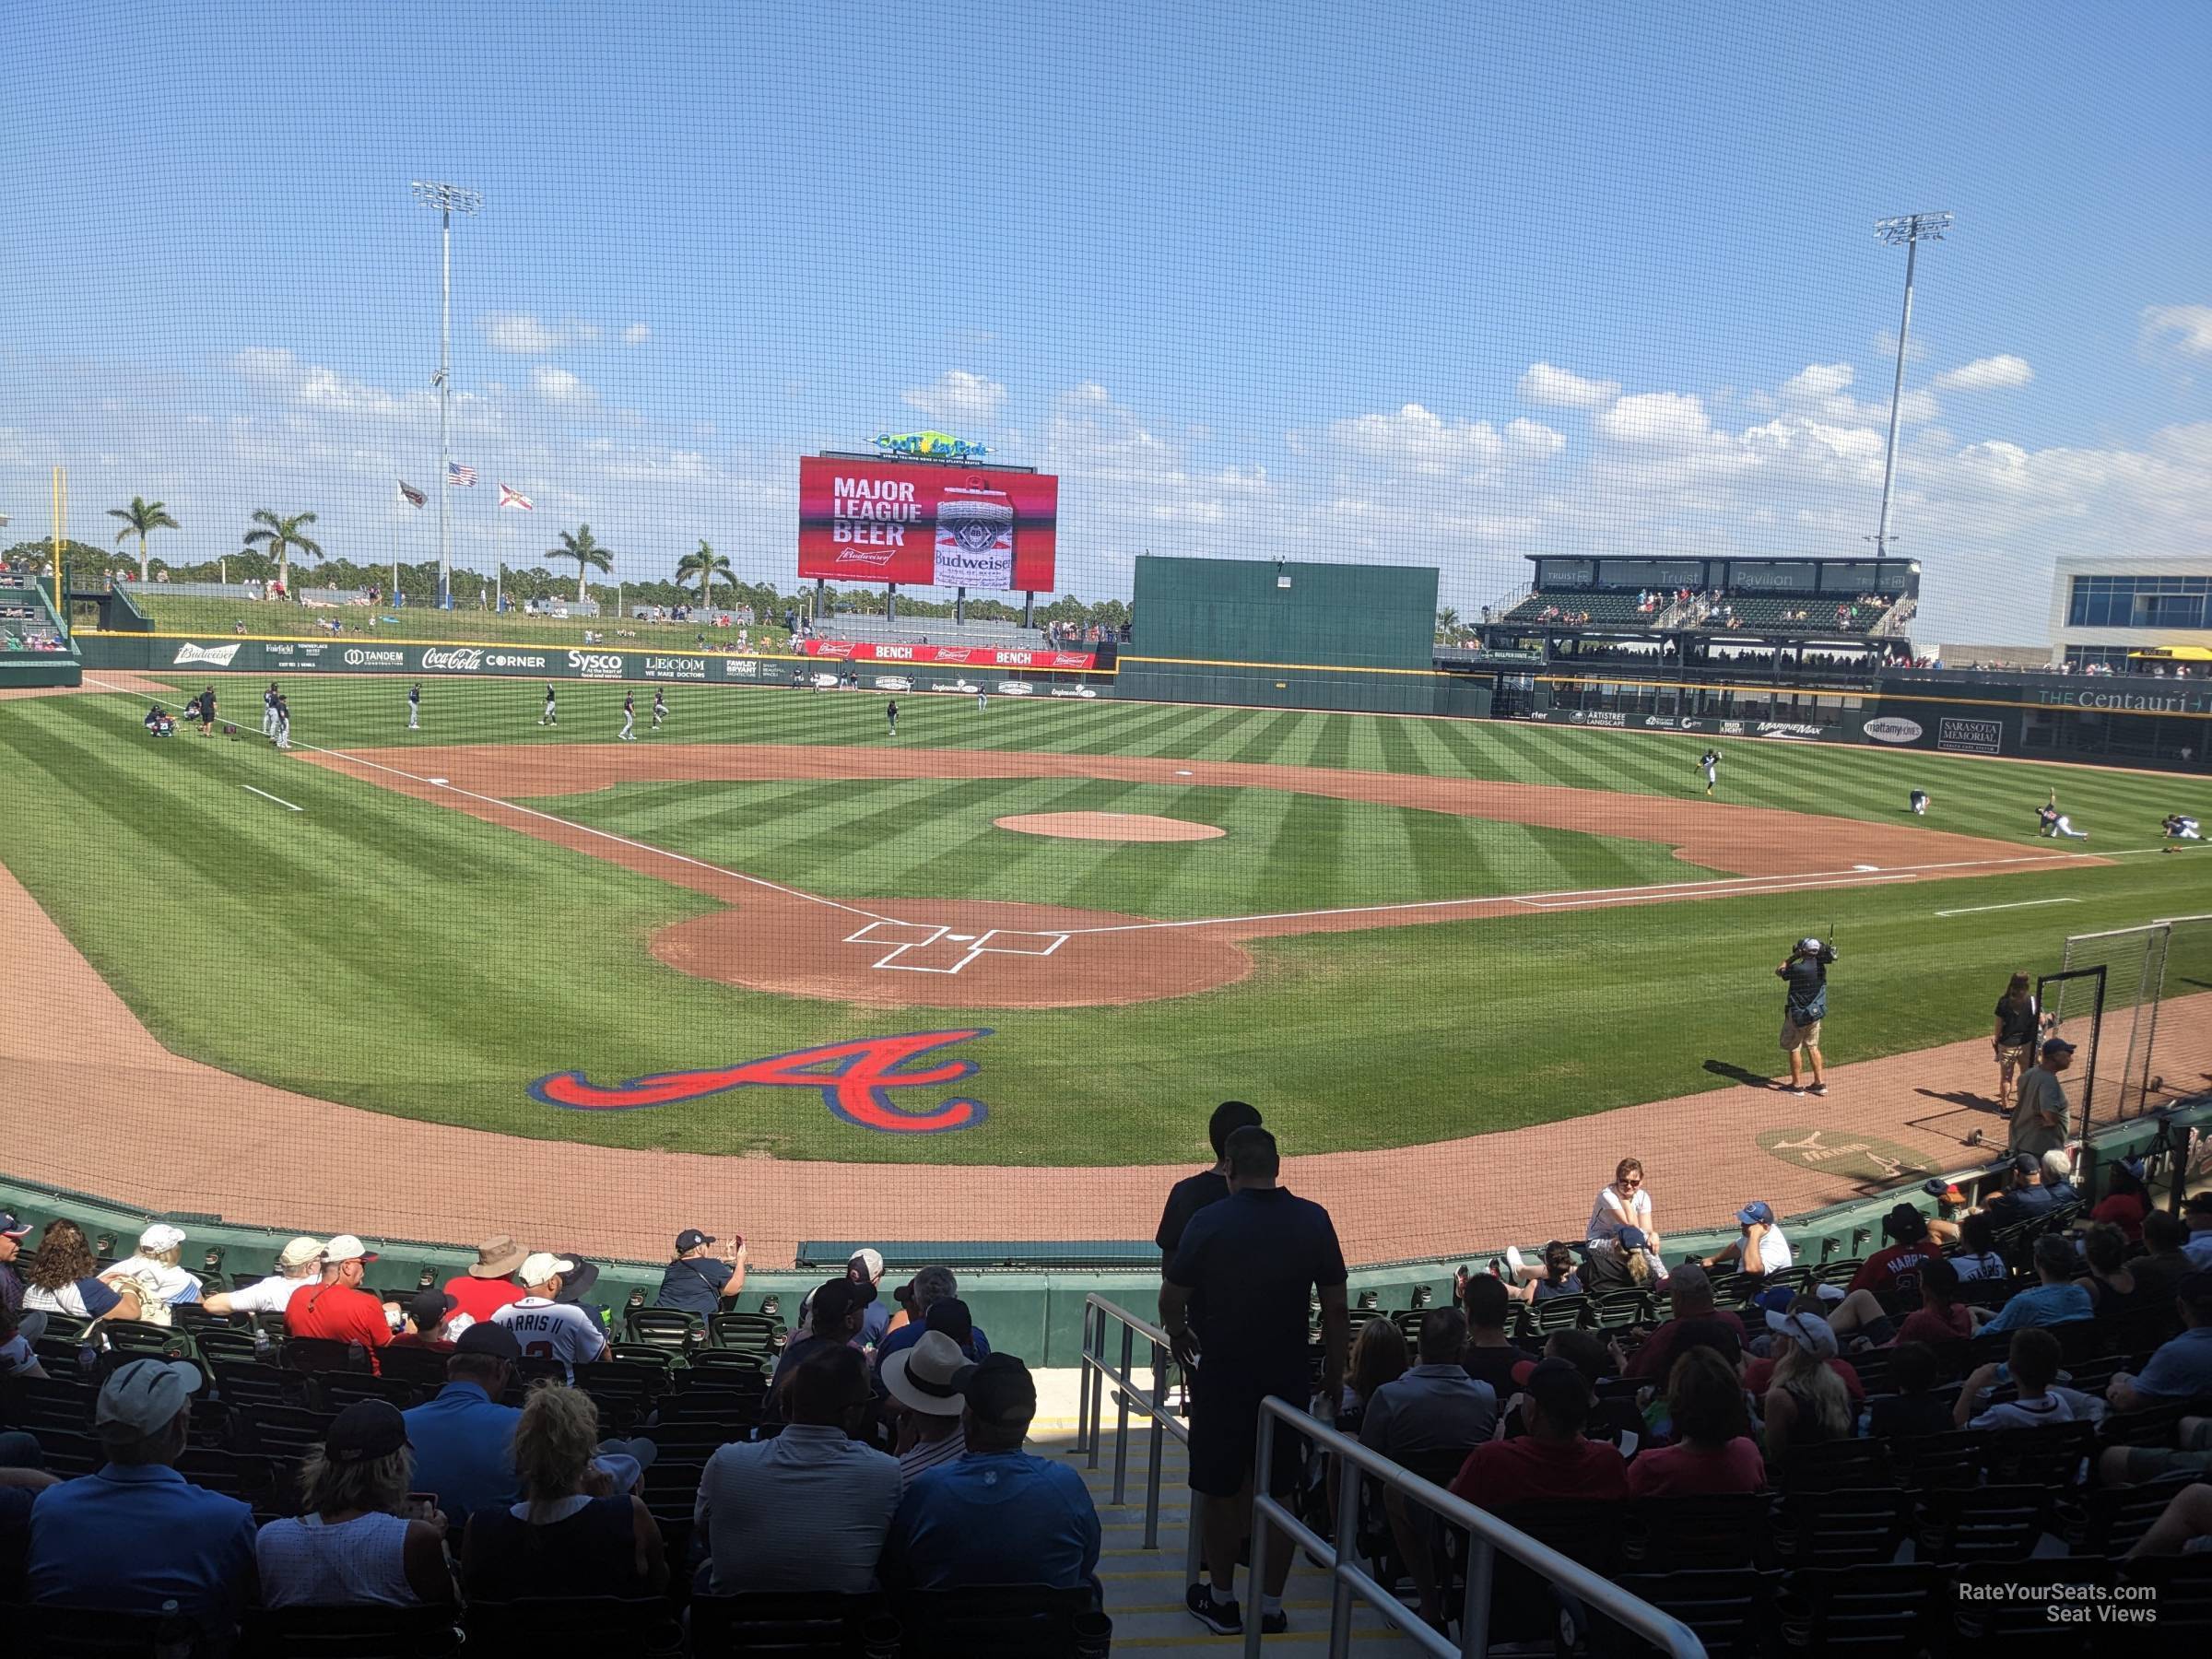 section 112, row 13 seat view  - cooltoday park